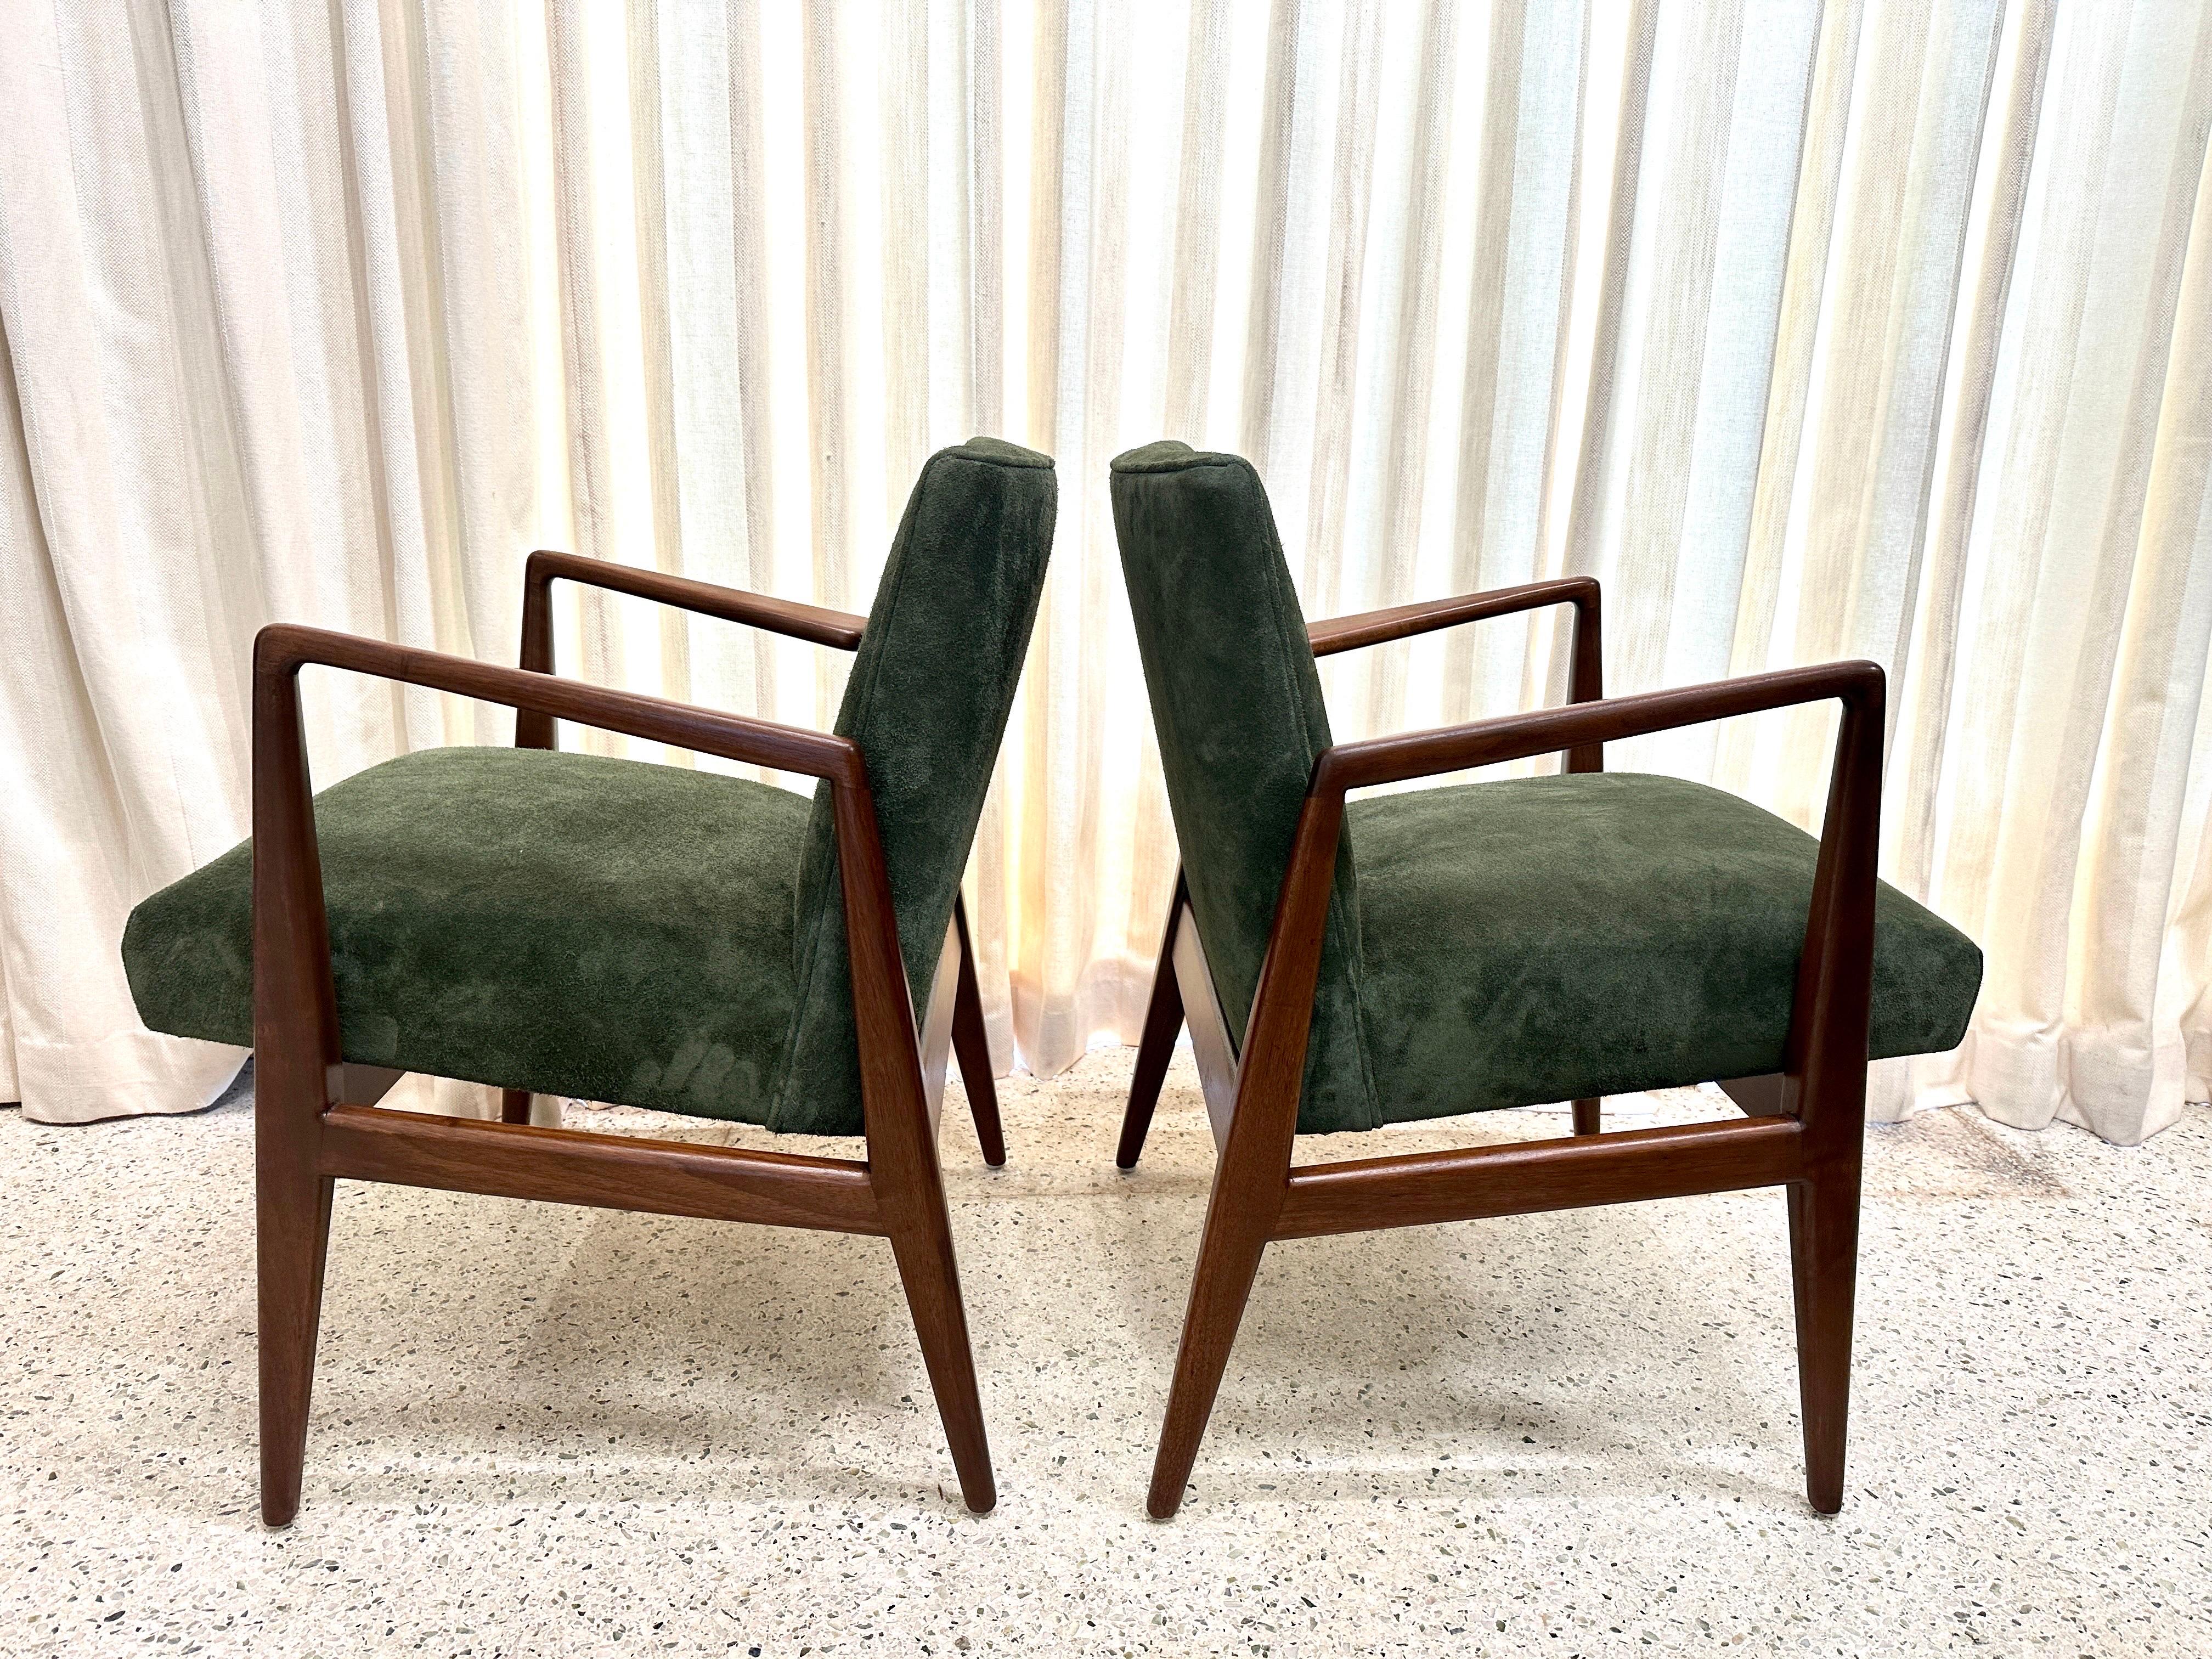 Wonderful authentic labelled vintage Jens Risom armchairs in Walnut frame and upholstered in a sumptuous Rolex green suede.  The walnut frame has been lovingly refinished to its original luster.  THIS ITEM IS LOCATED AND WILL SHIP FROM OUR MIAMI,